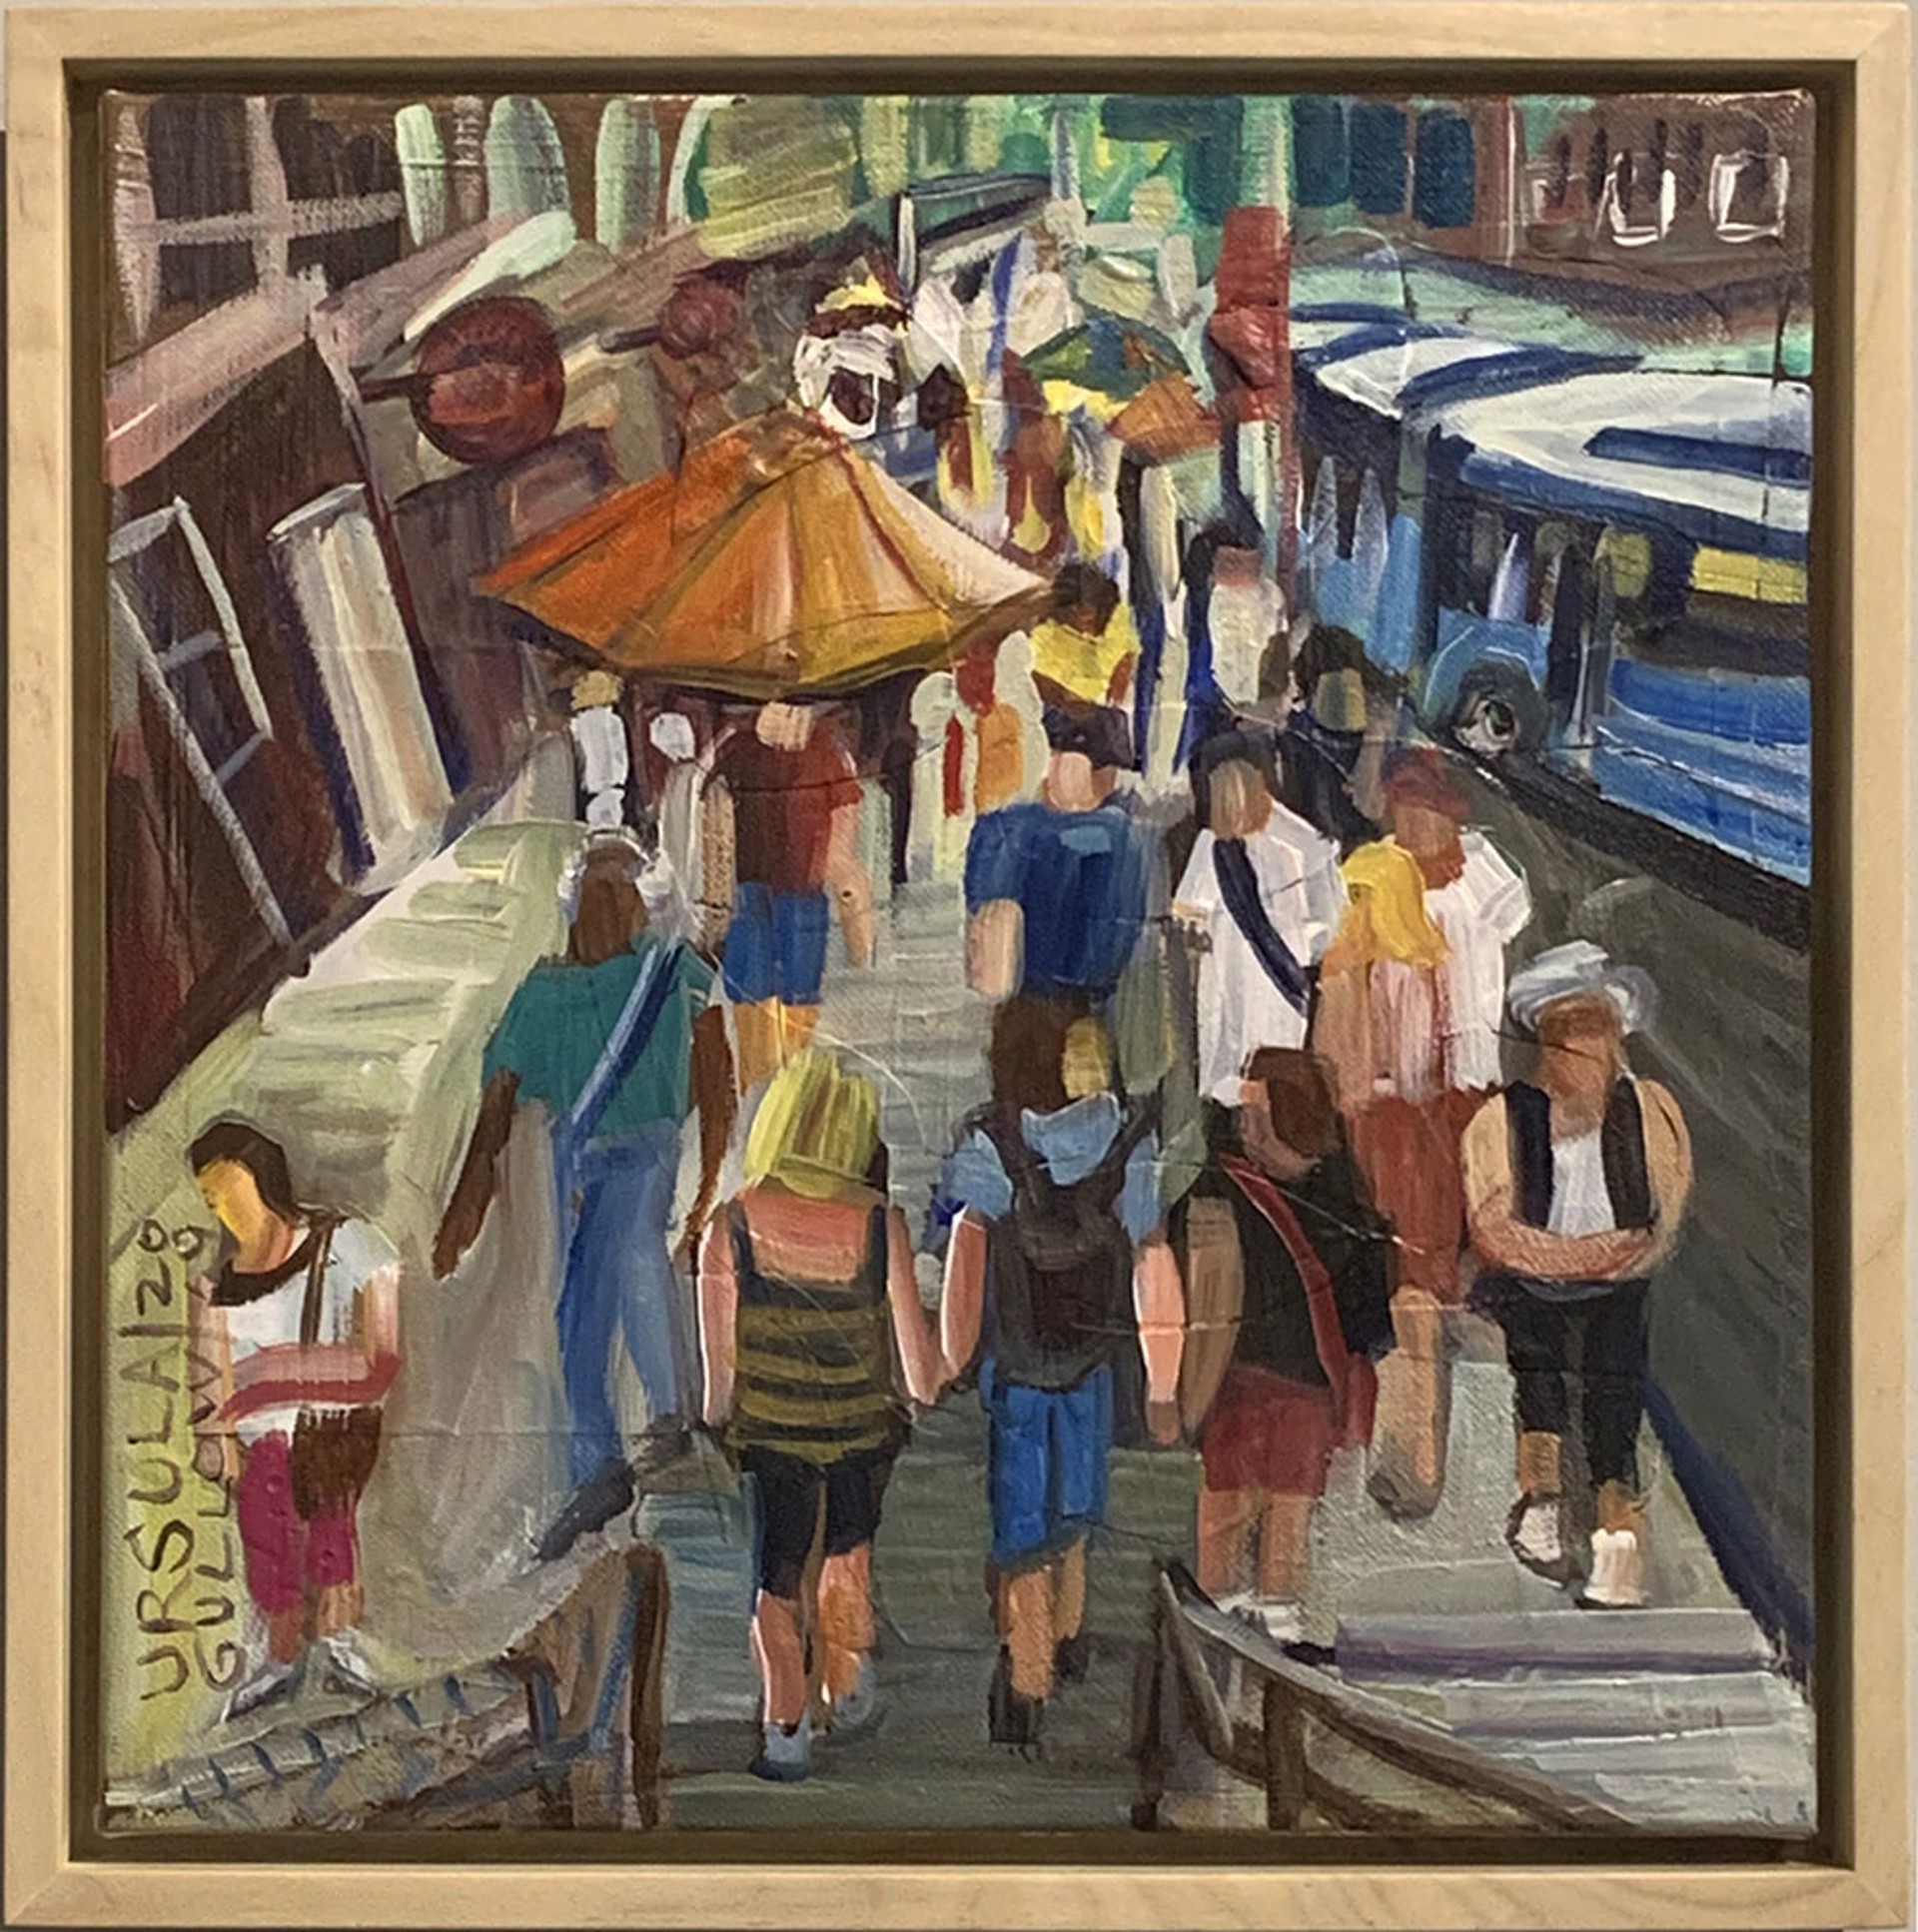 Busy Street by Ursula Gullow